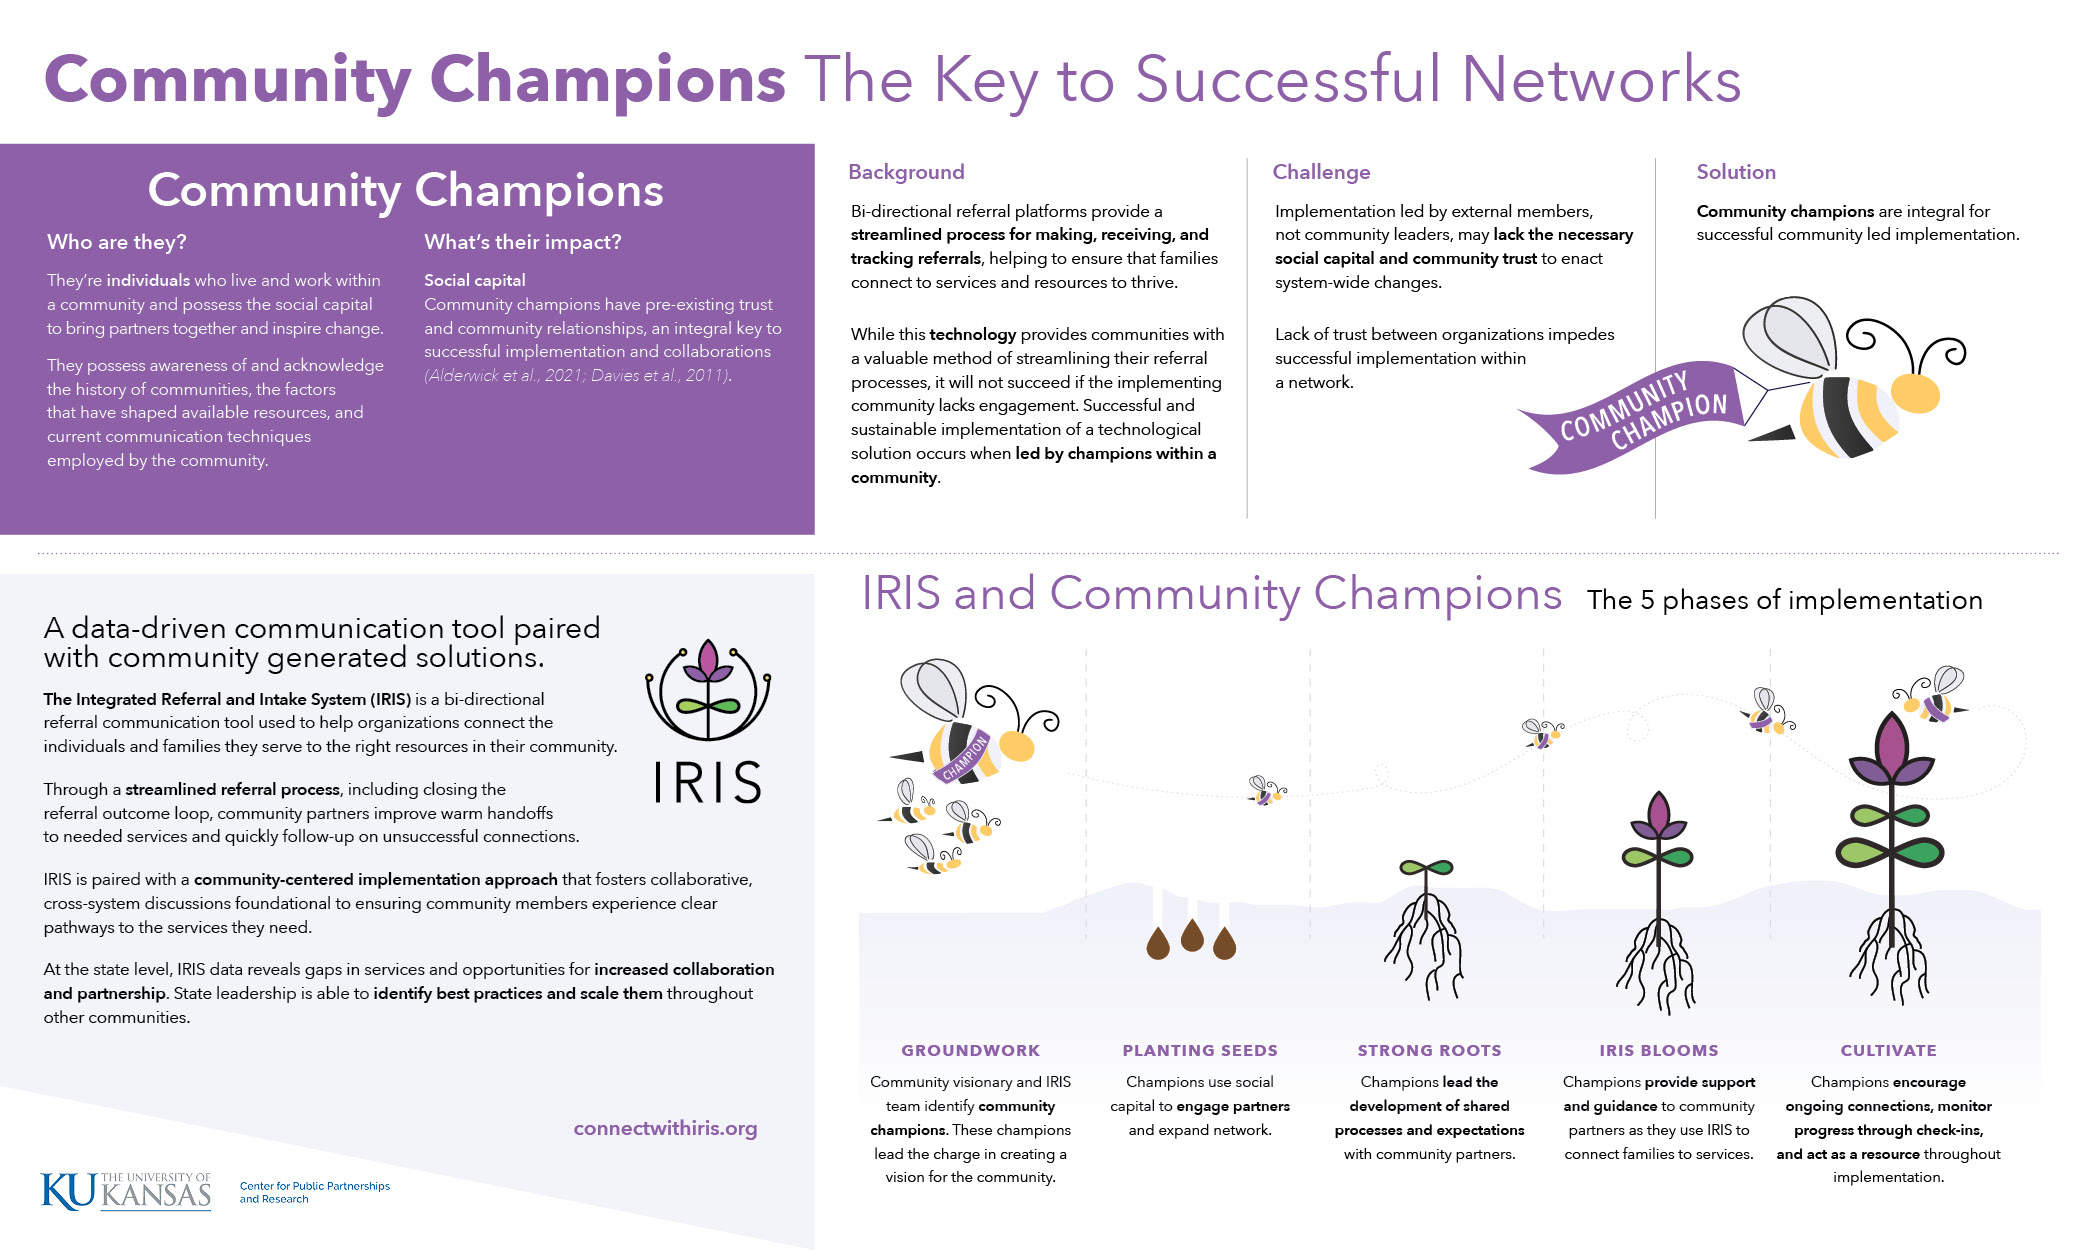 Community Champions poster for 2021 KPHA Conference